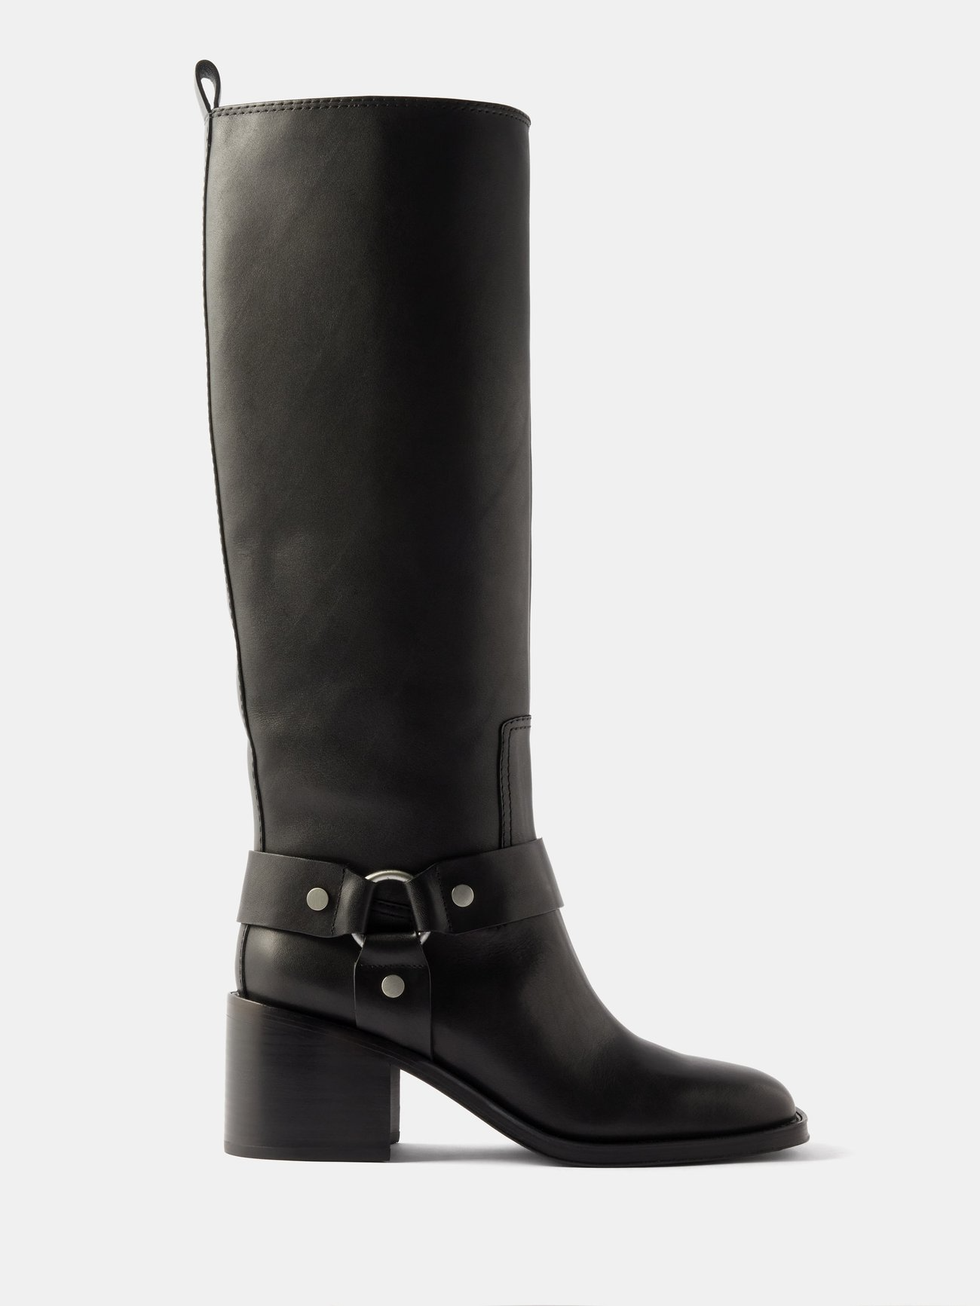 Audrey 75 leather knee-high boots